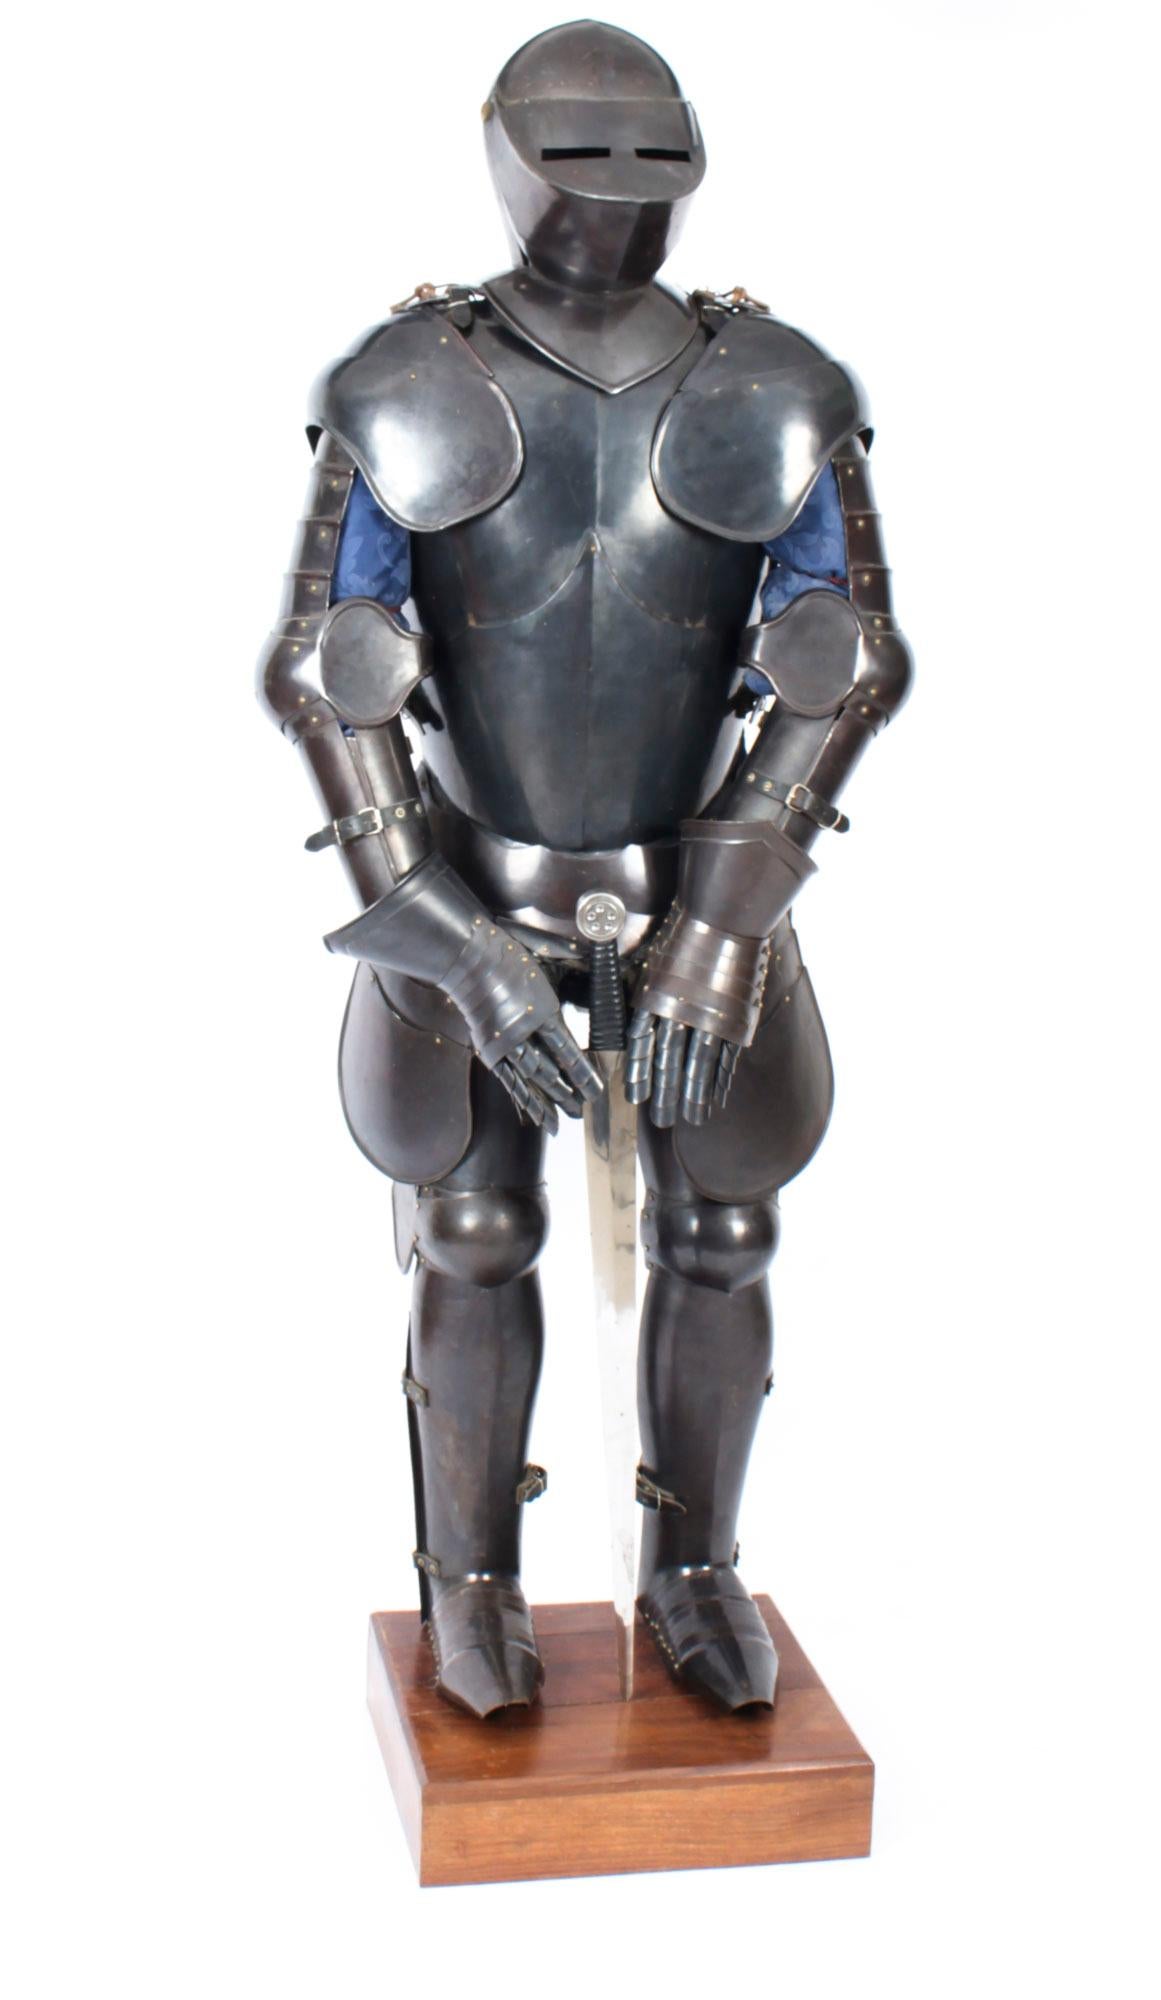 This is a fabulous hand crafted complete suit of 16th Century style armour dating from the second half of the 20th century.

The fully articulated suit  is mounted on a wooden stand complete with a two handed double edged sword. 

This is an